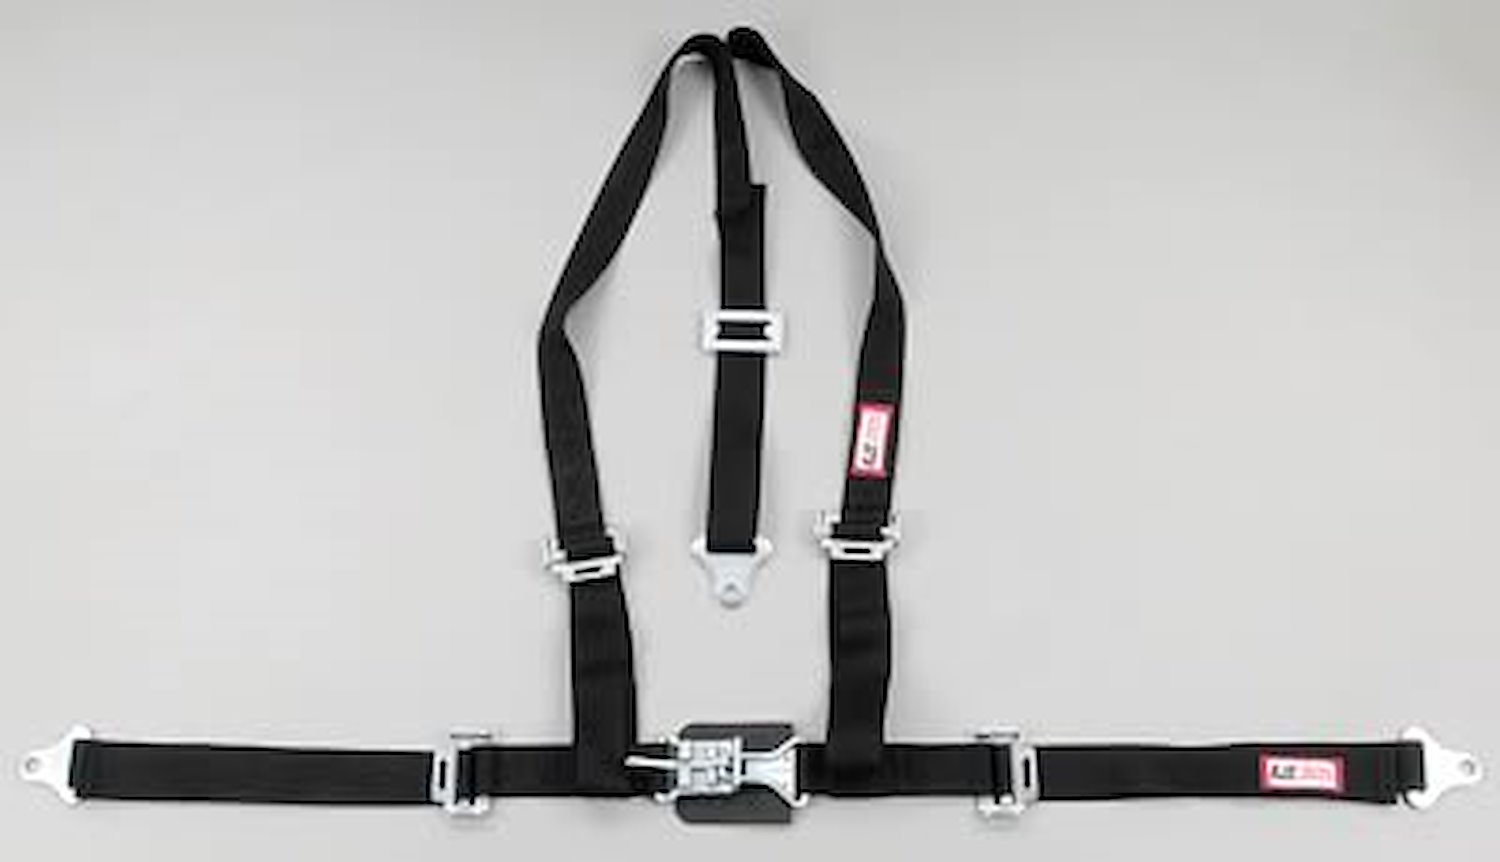 NON-SFI L&L HARNESS 2 PULL UP Lap Belt SEWN IN 2 S.H. Y FLOOR Mount w/STERNUM STRAP ALL WRAP ENDS RED